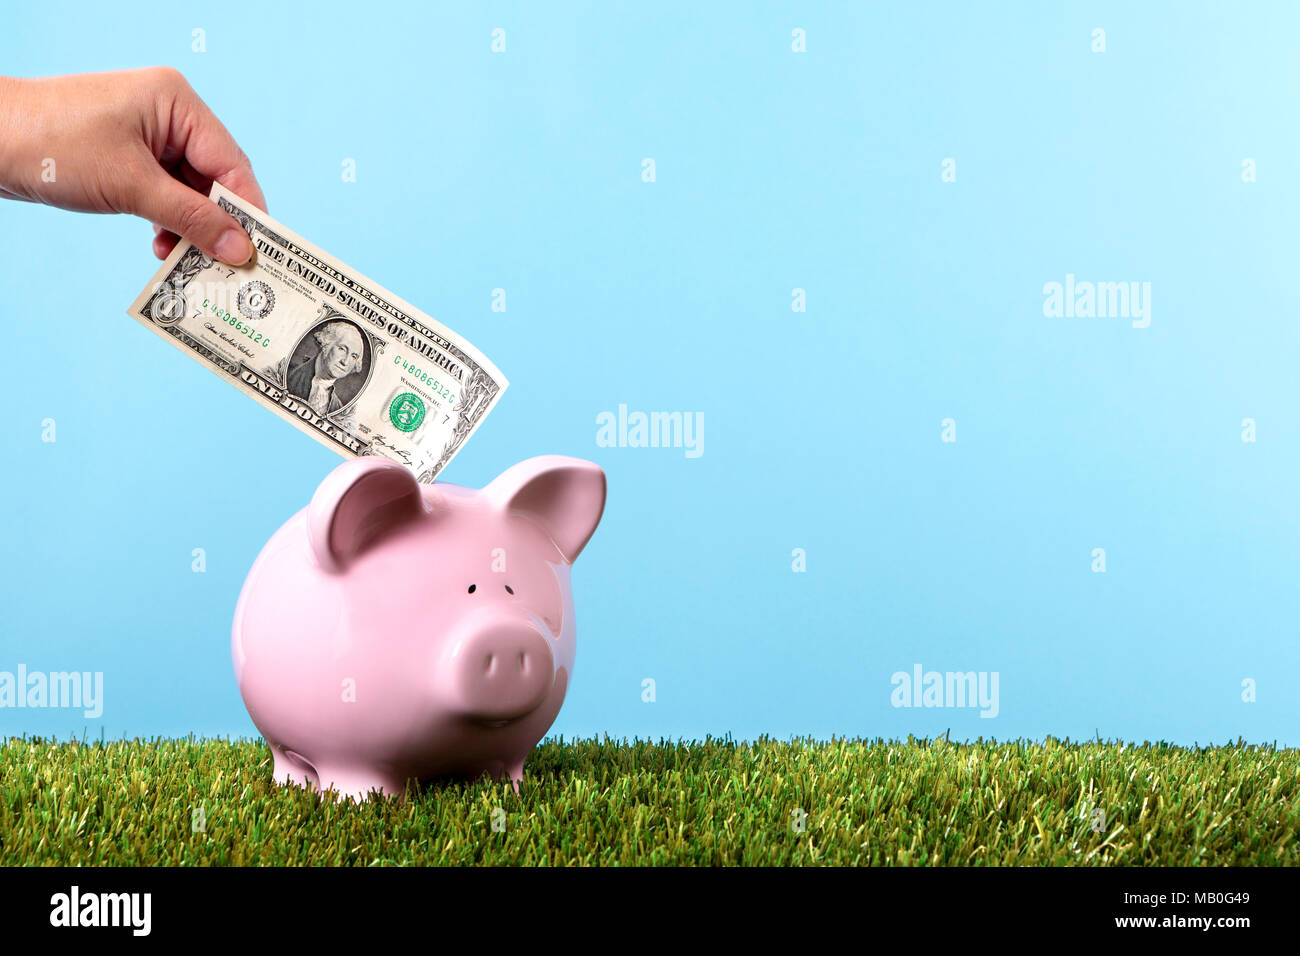 Hand putting a one dollar bill into a pink piggy bank, with grass and blue sky Stock Photo